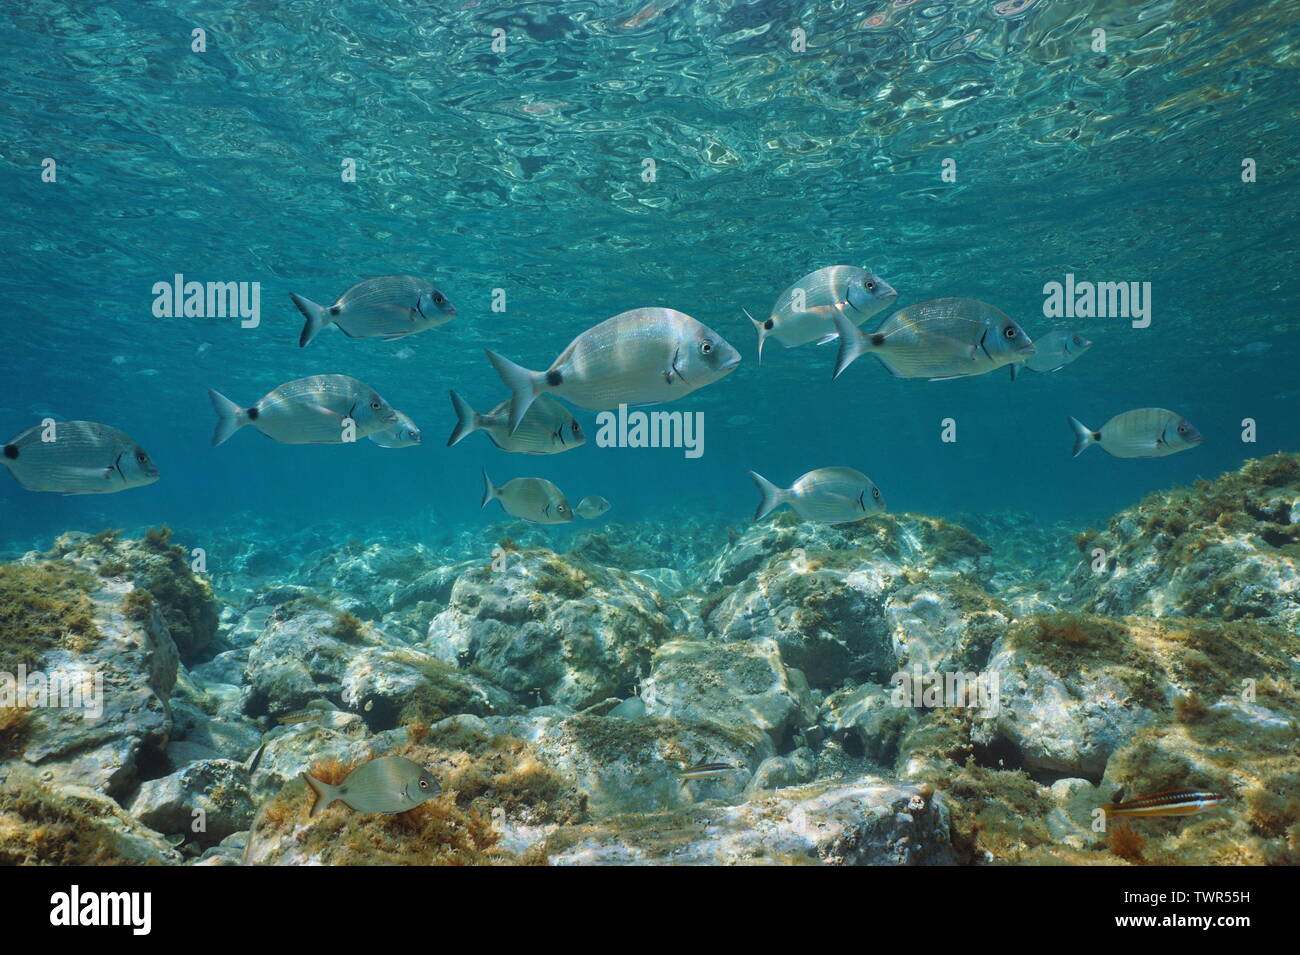 Sargo seabream fish, Diplodus sargus, underwater in Mediterranean sea between water surface and rocks on the seabed, France Stock Photo